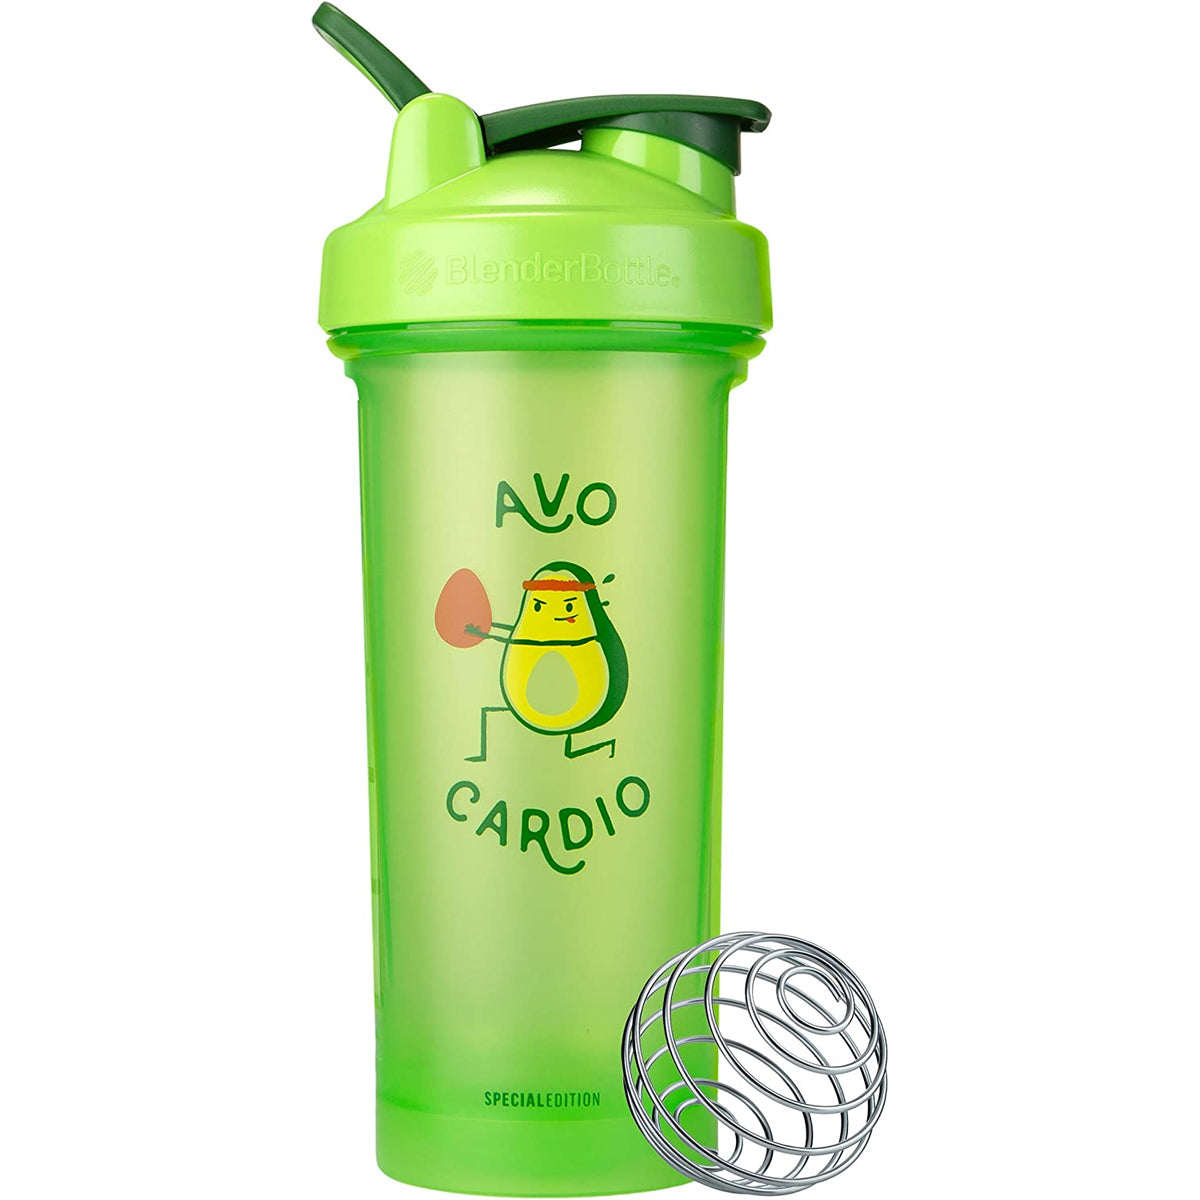 Blender Bottle Foodie Special Edition 28 oz. Shaker Mixer Cup with Loop Top